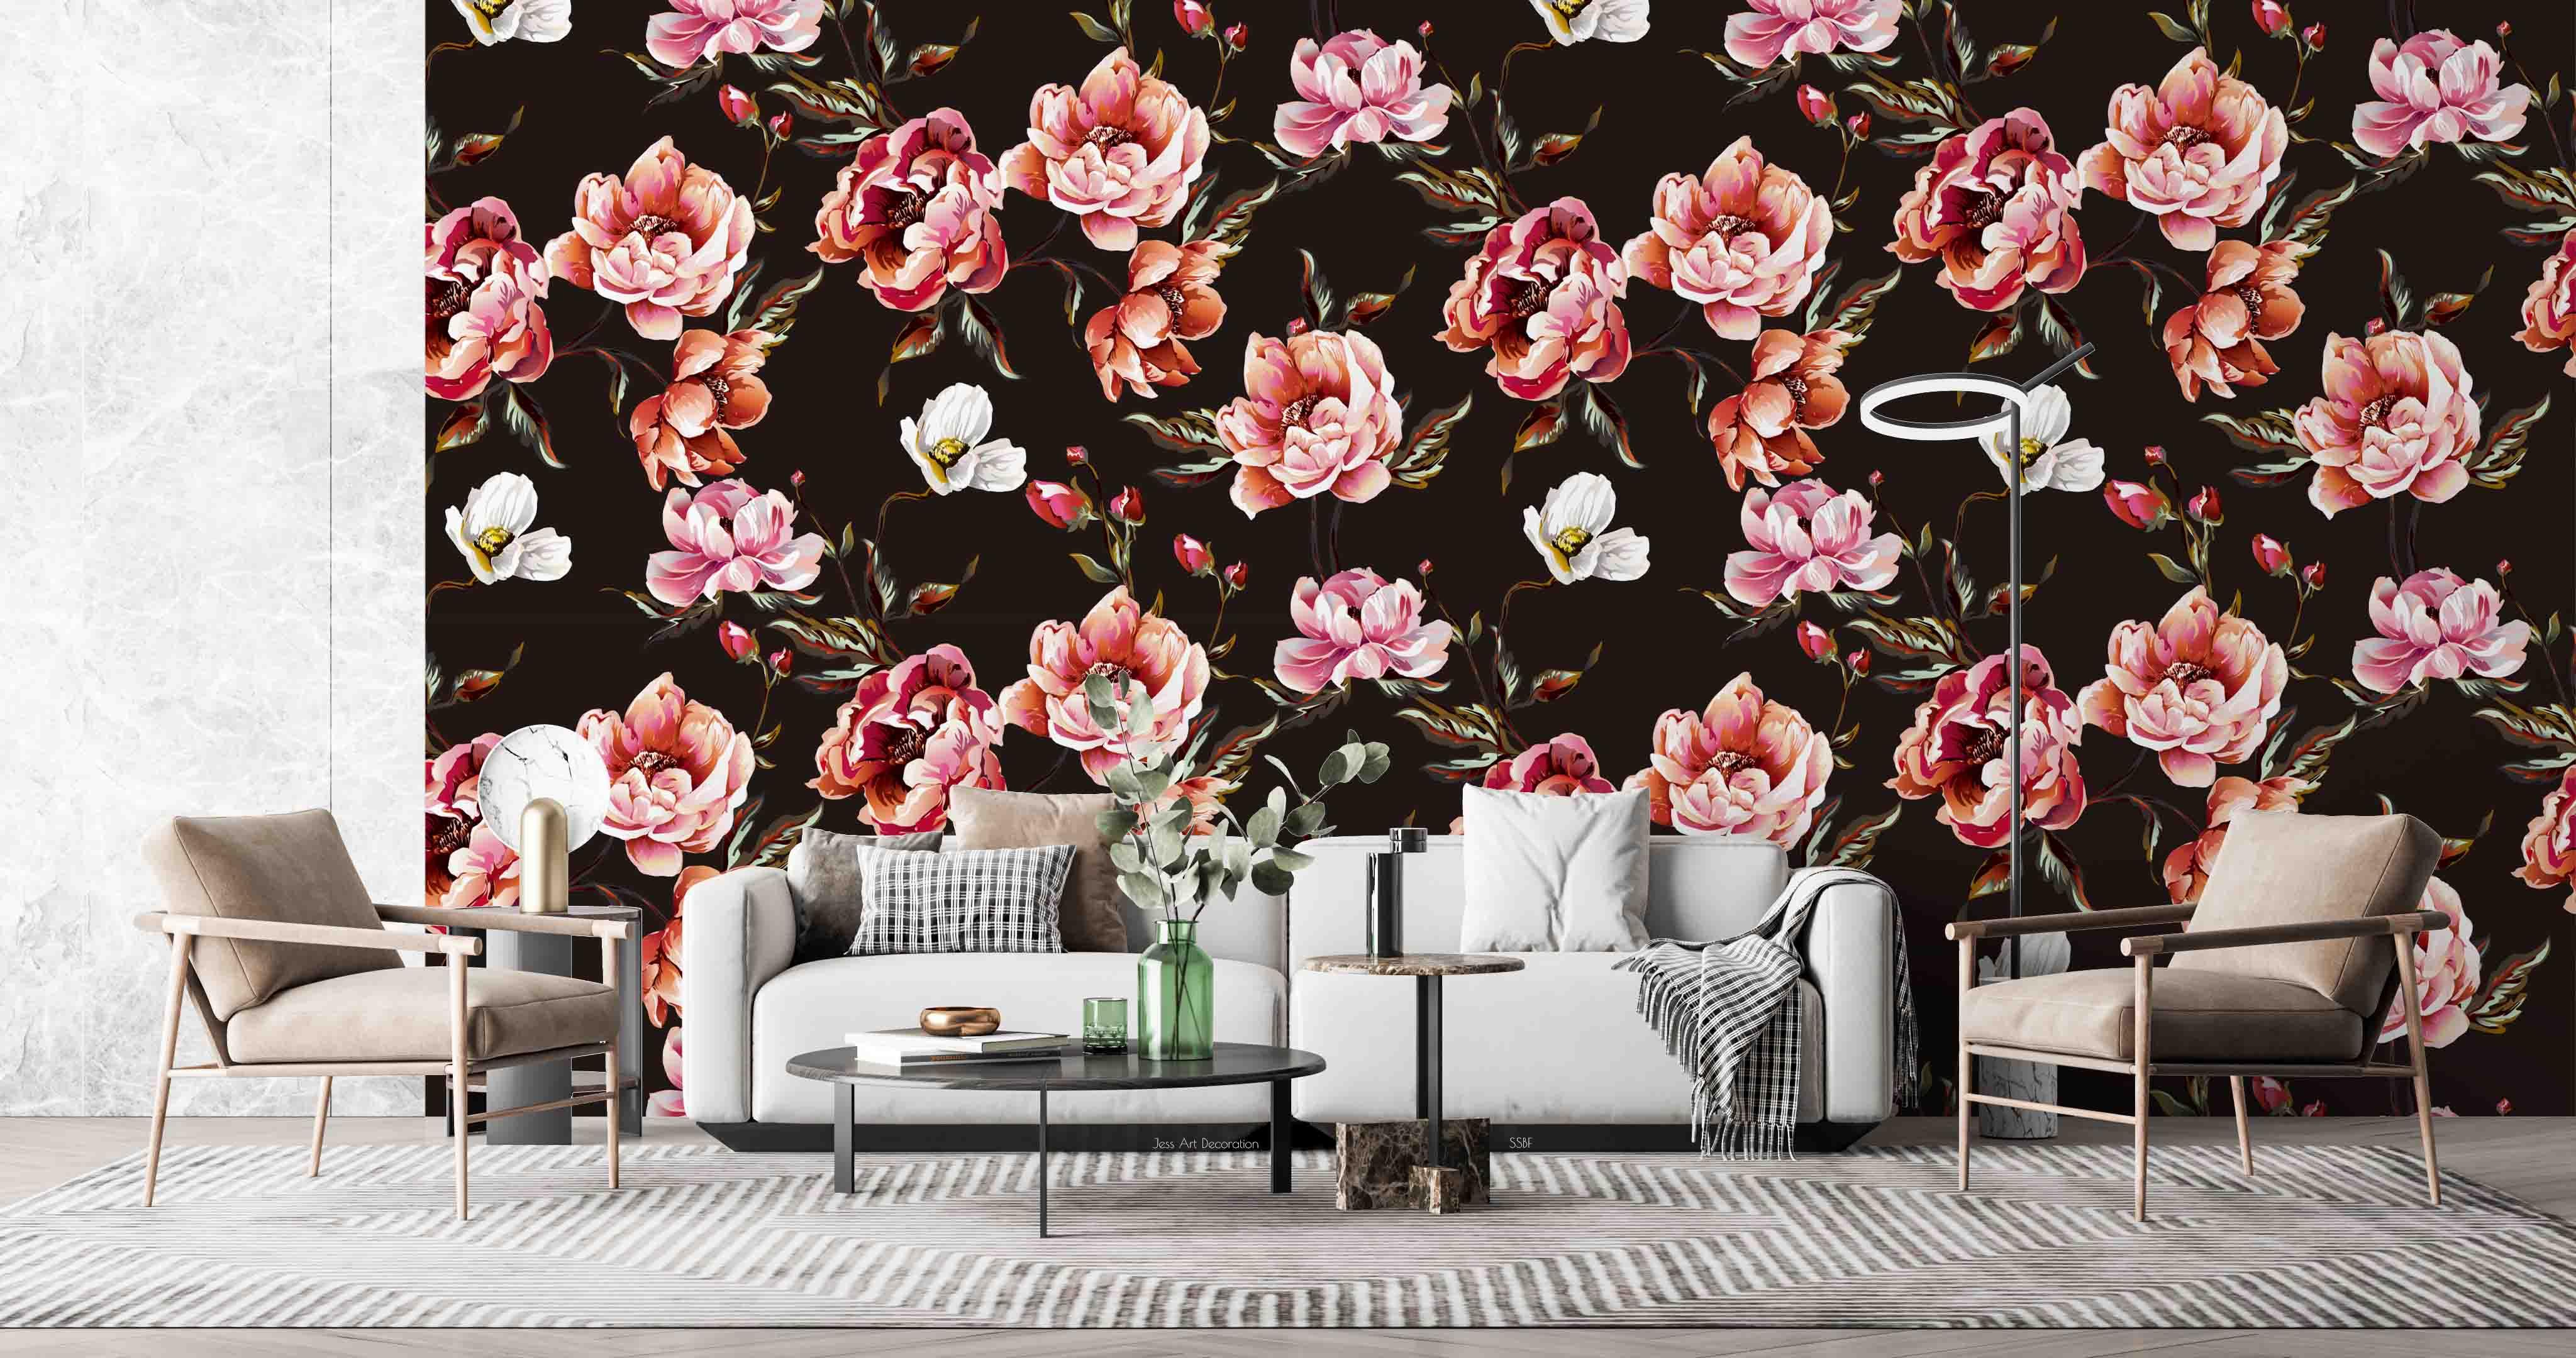 3D Vintage Baroque Art Blooming Pink Peony Background Wall Mural Wallpaper GD 3572- Jess Art Decoration